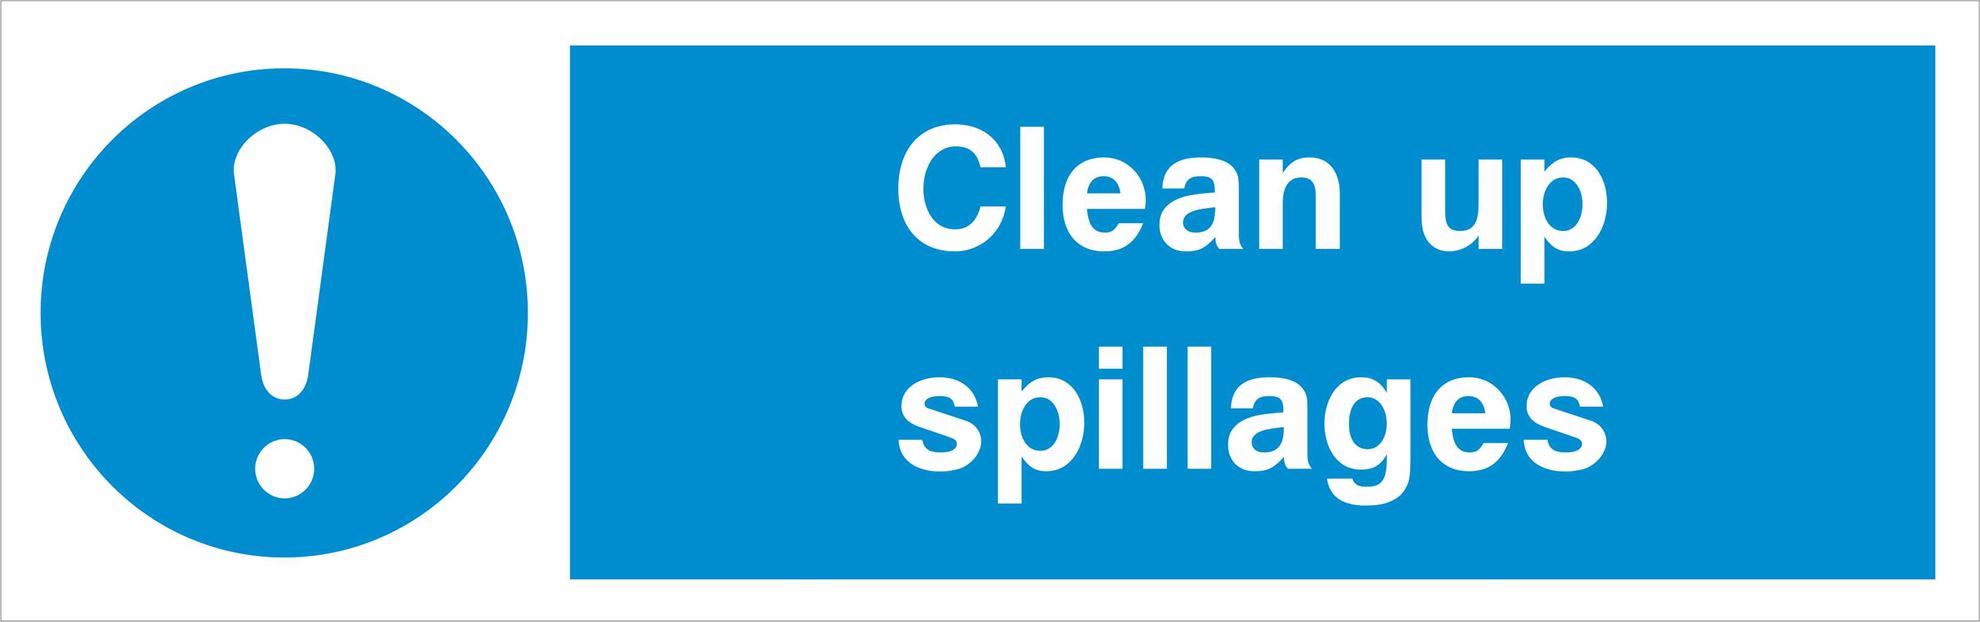 Clean up spillages